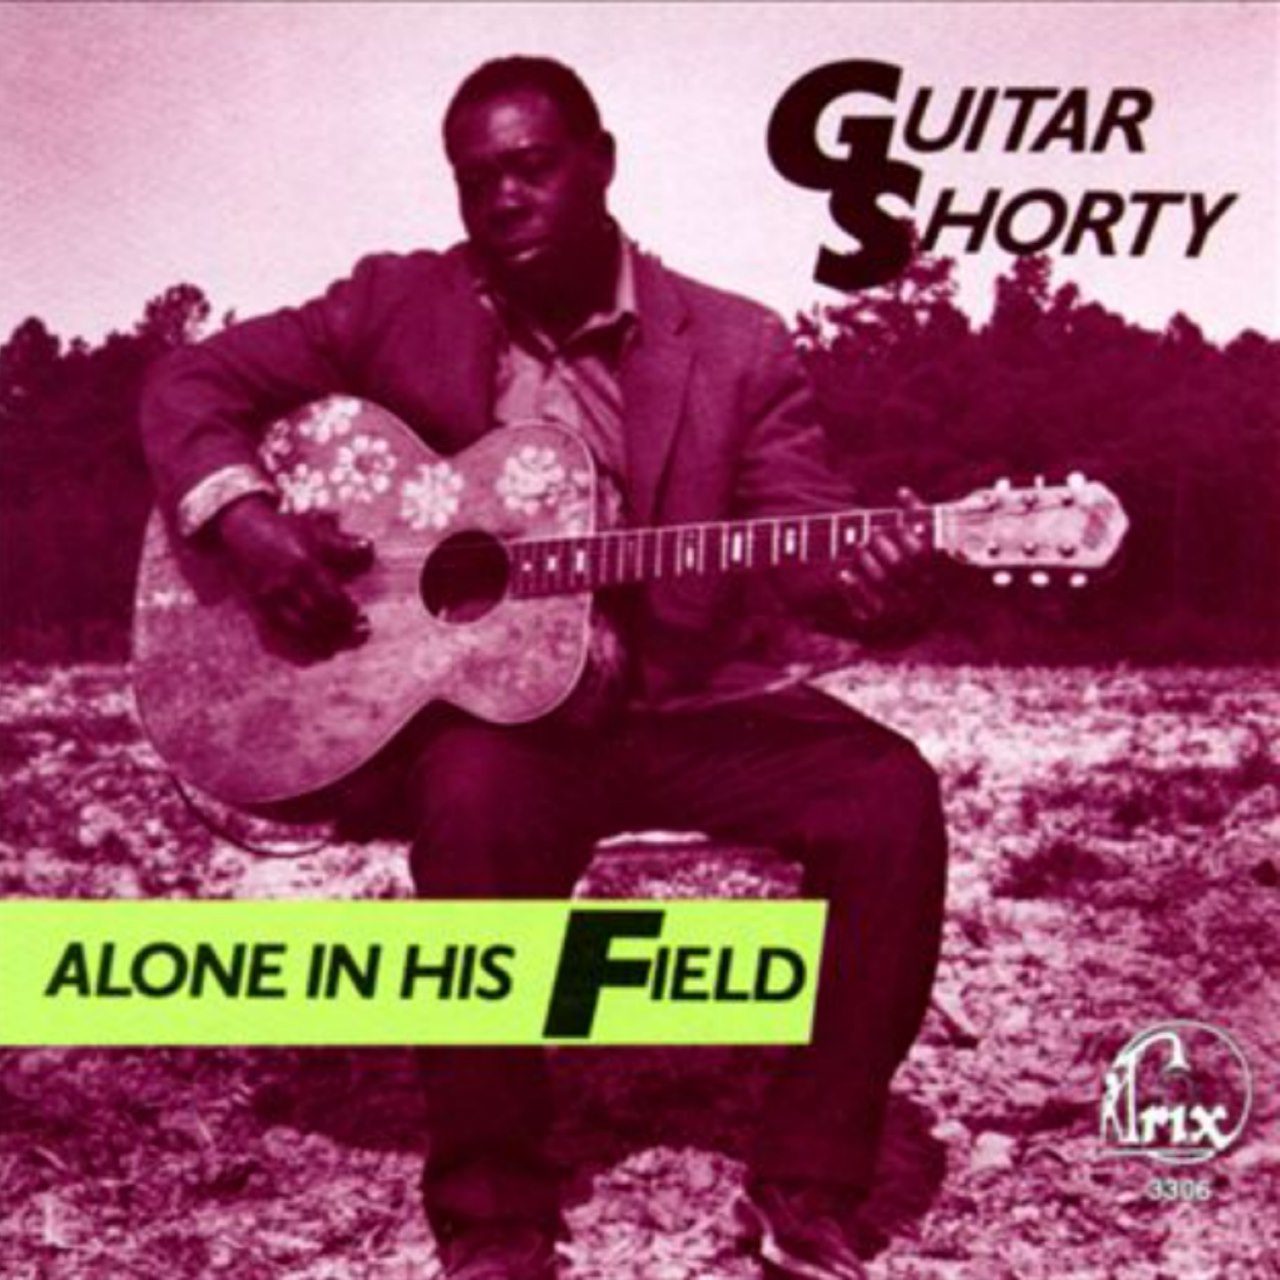 Guitar Shorty – Alone In His Fields cover album